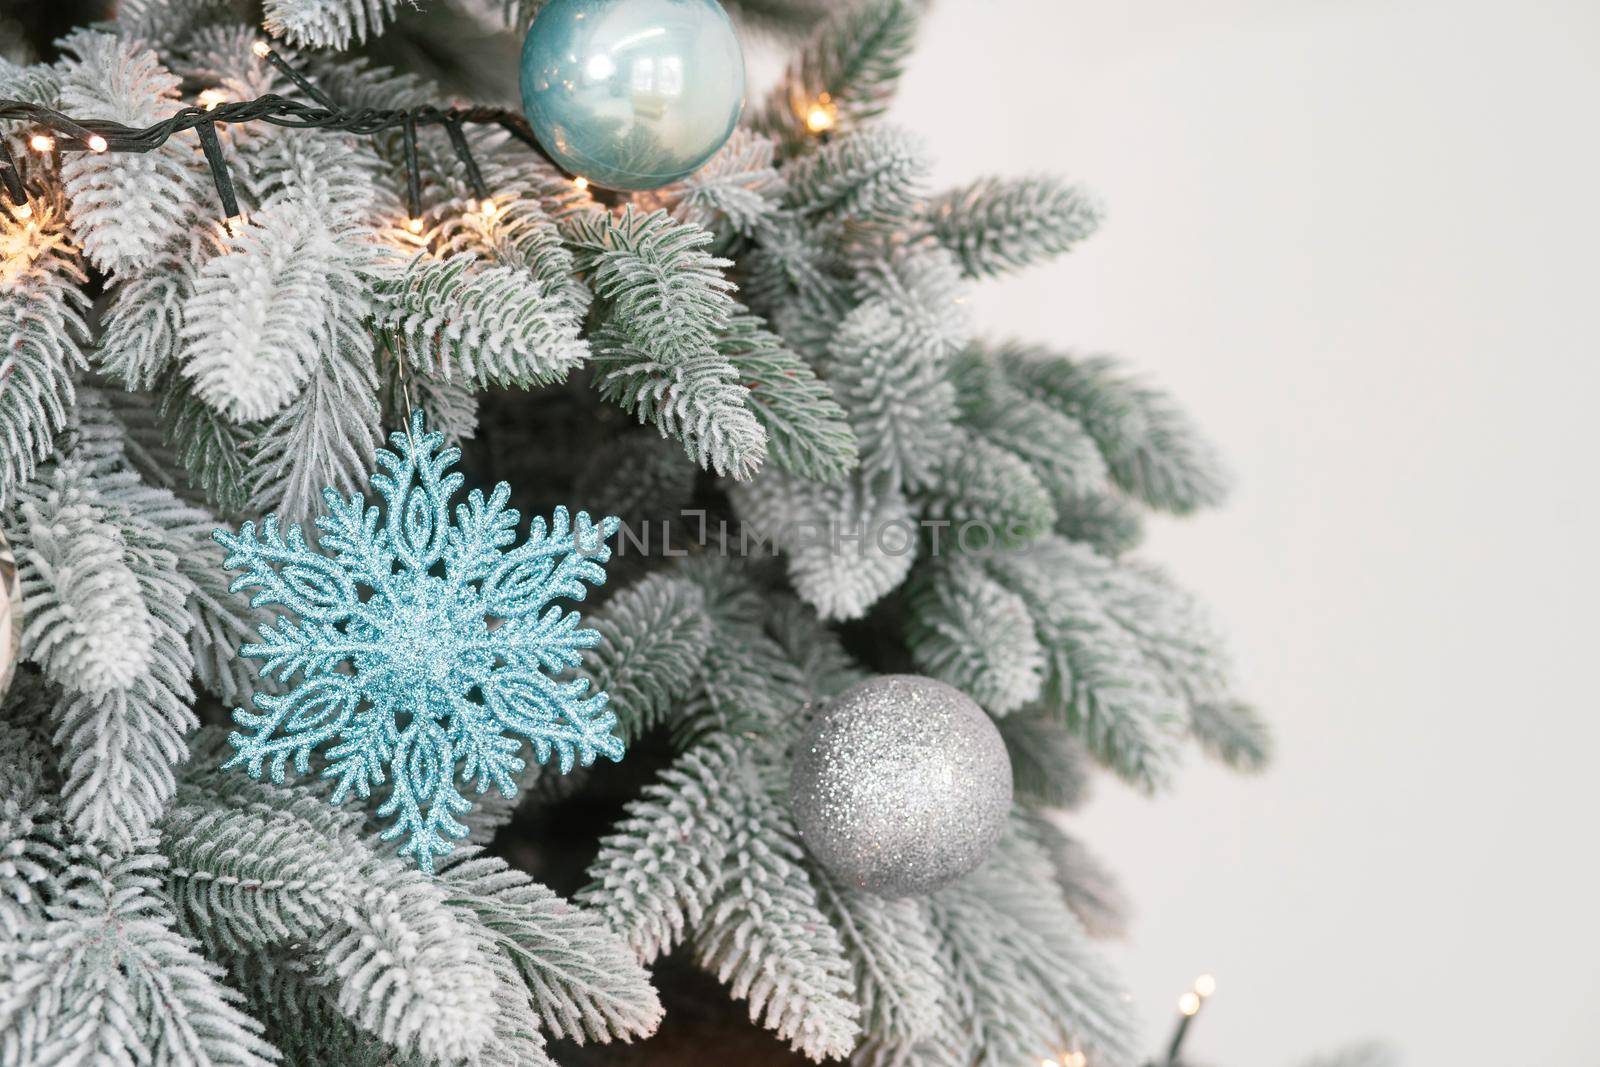 Artificial Christmas Tree close-up. Light branches are decorated with balloons and garland. On a branch hangs a blue snowflake. High quality photo by LipikStockMedia